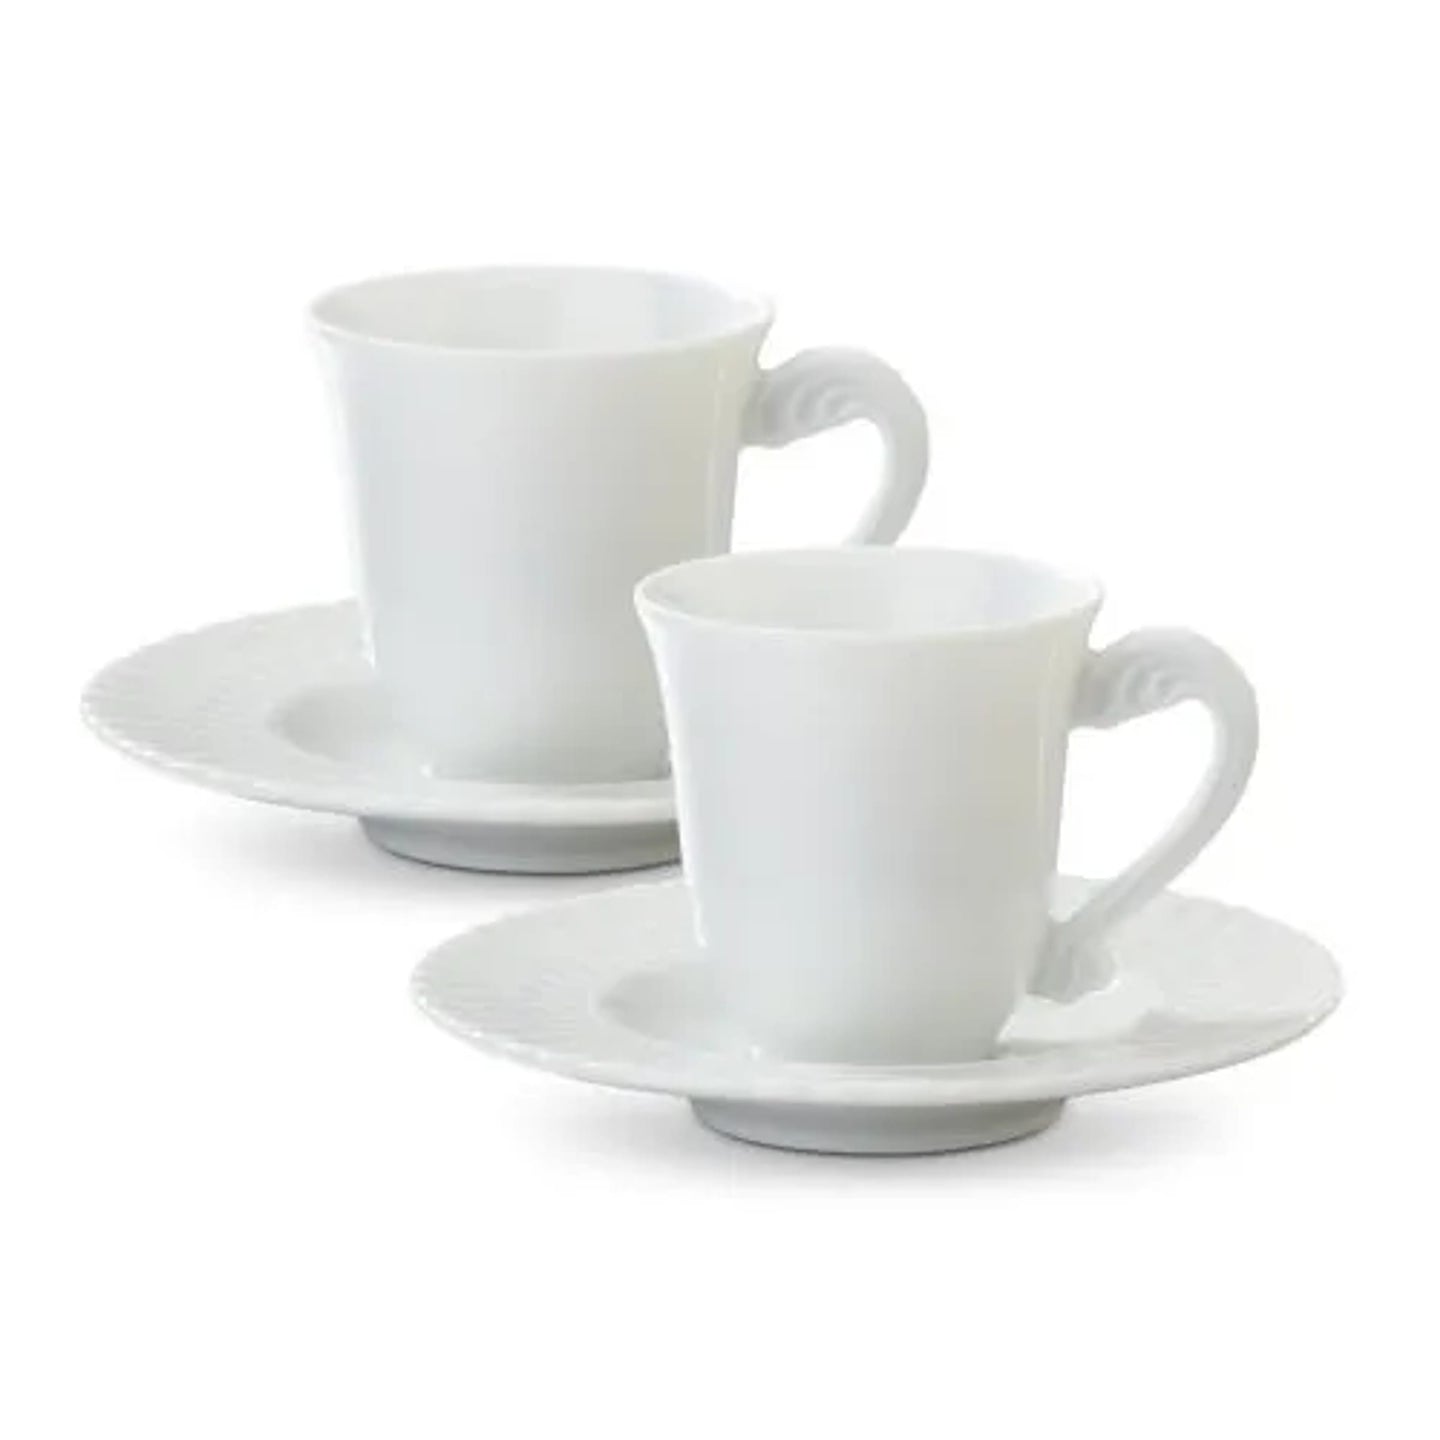 Set Of Two White Espresso Cups With Handle & Saucers, 2 Ceramic